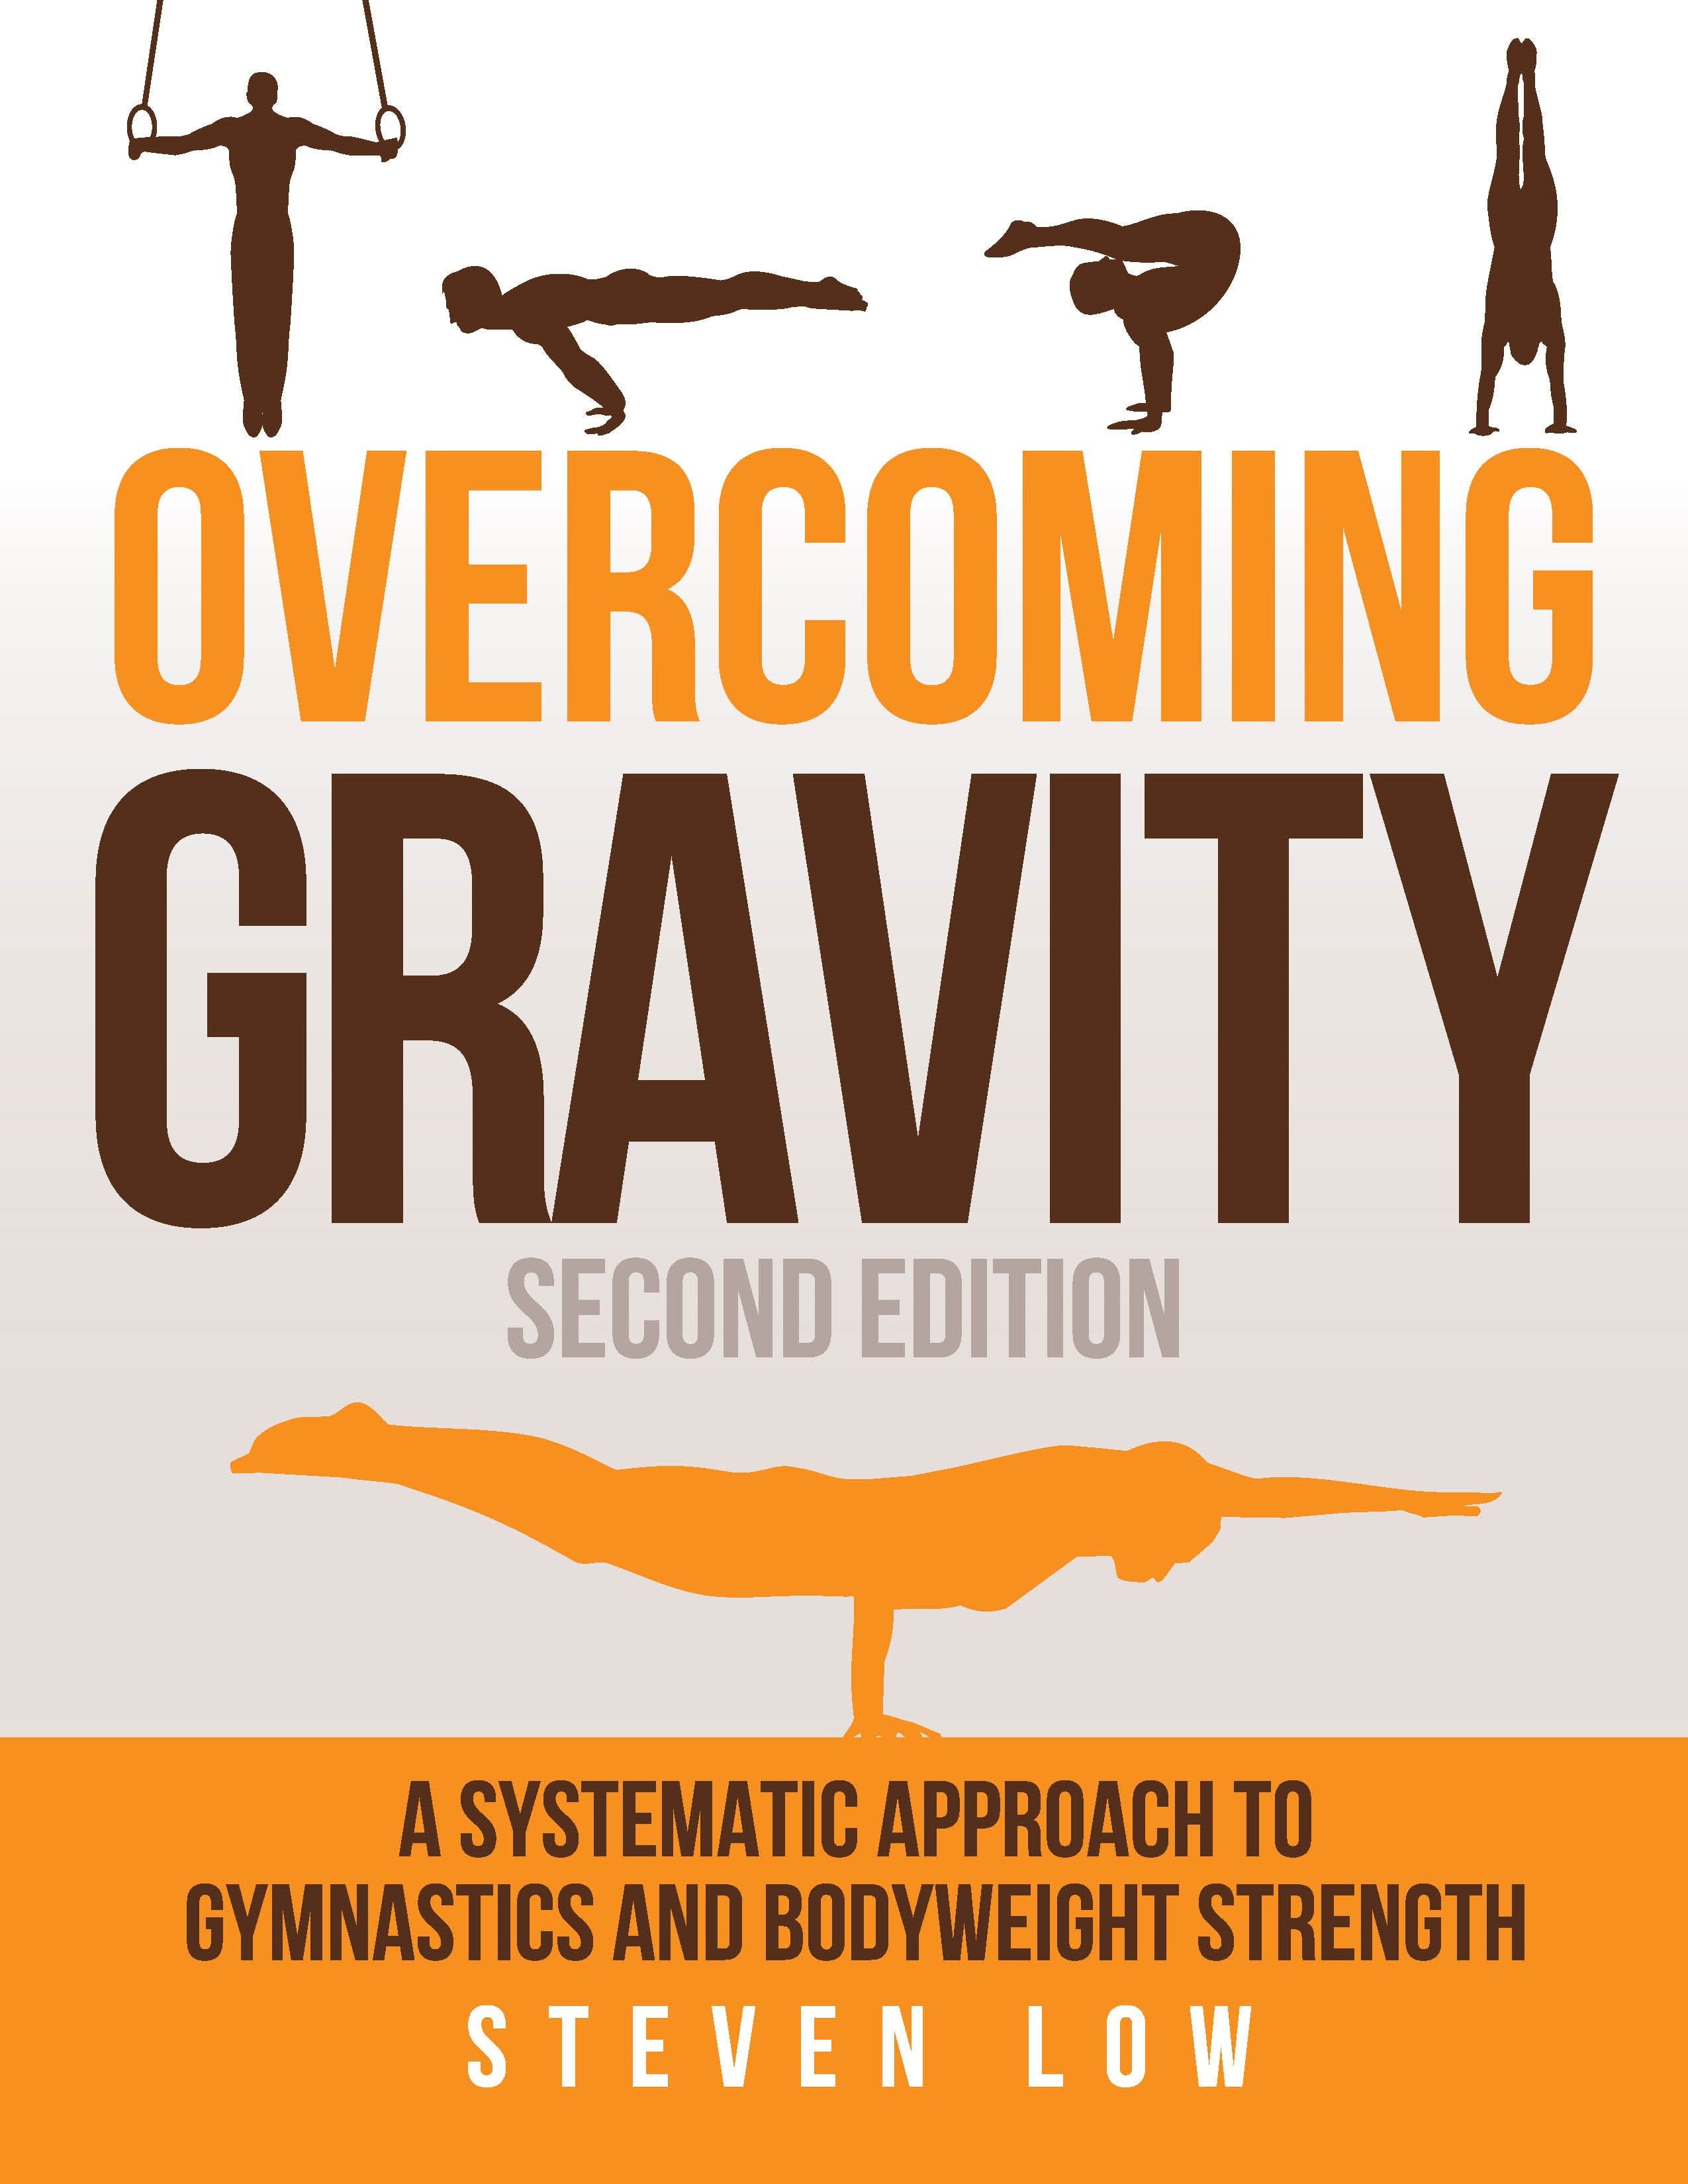 Overcoming Gravity by Steven Low